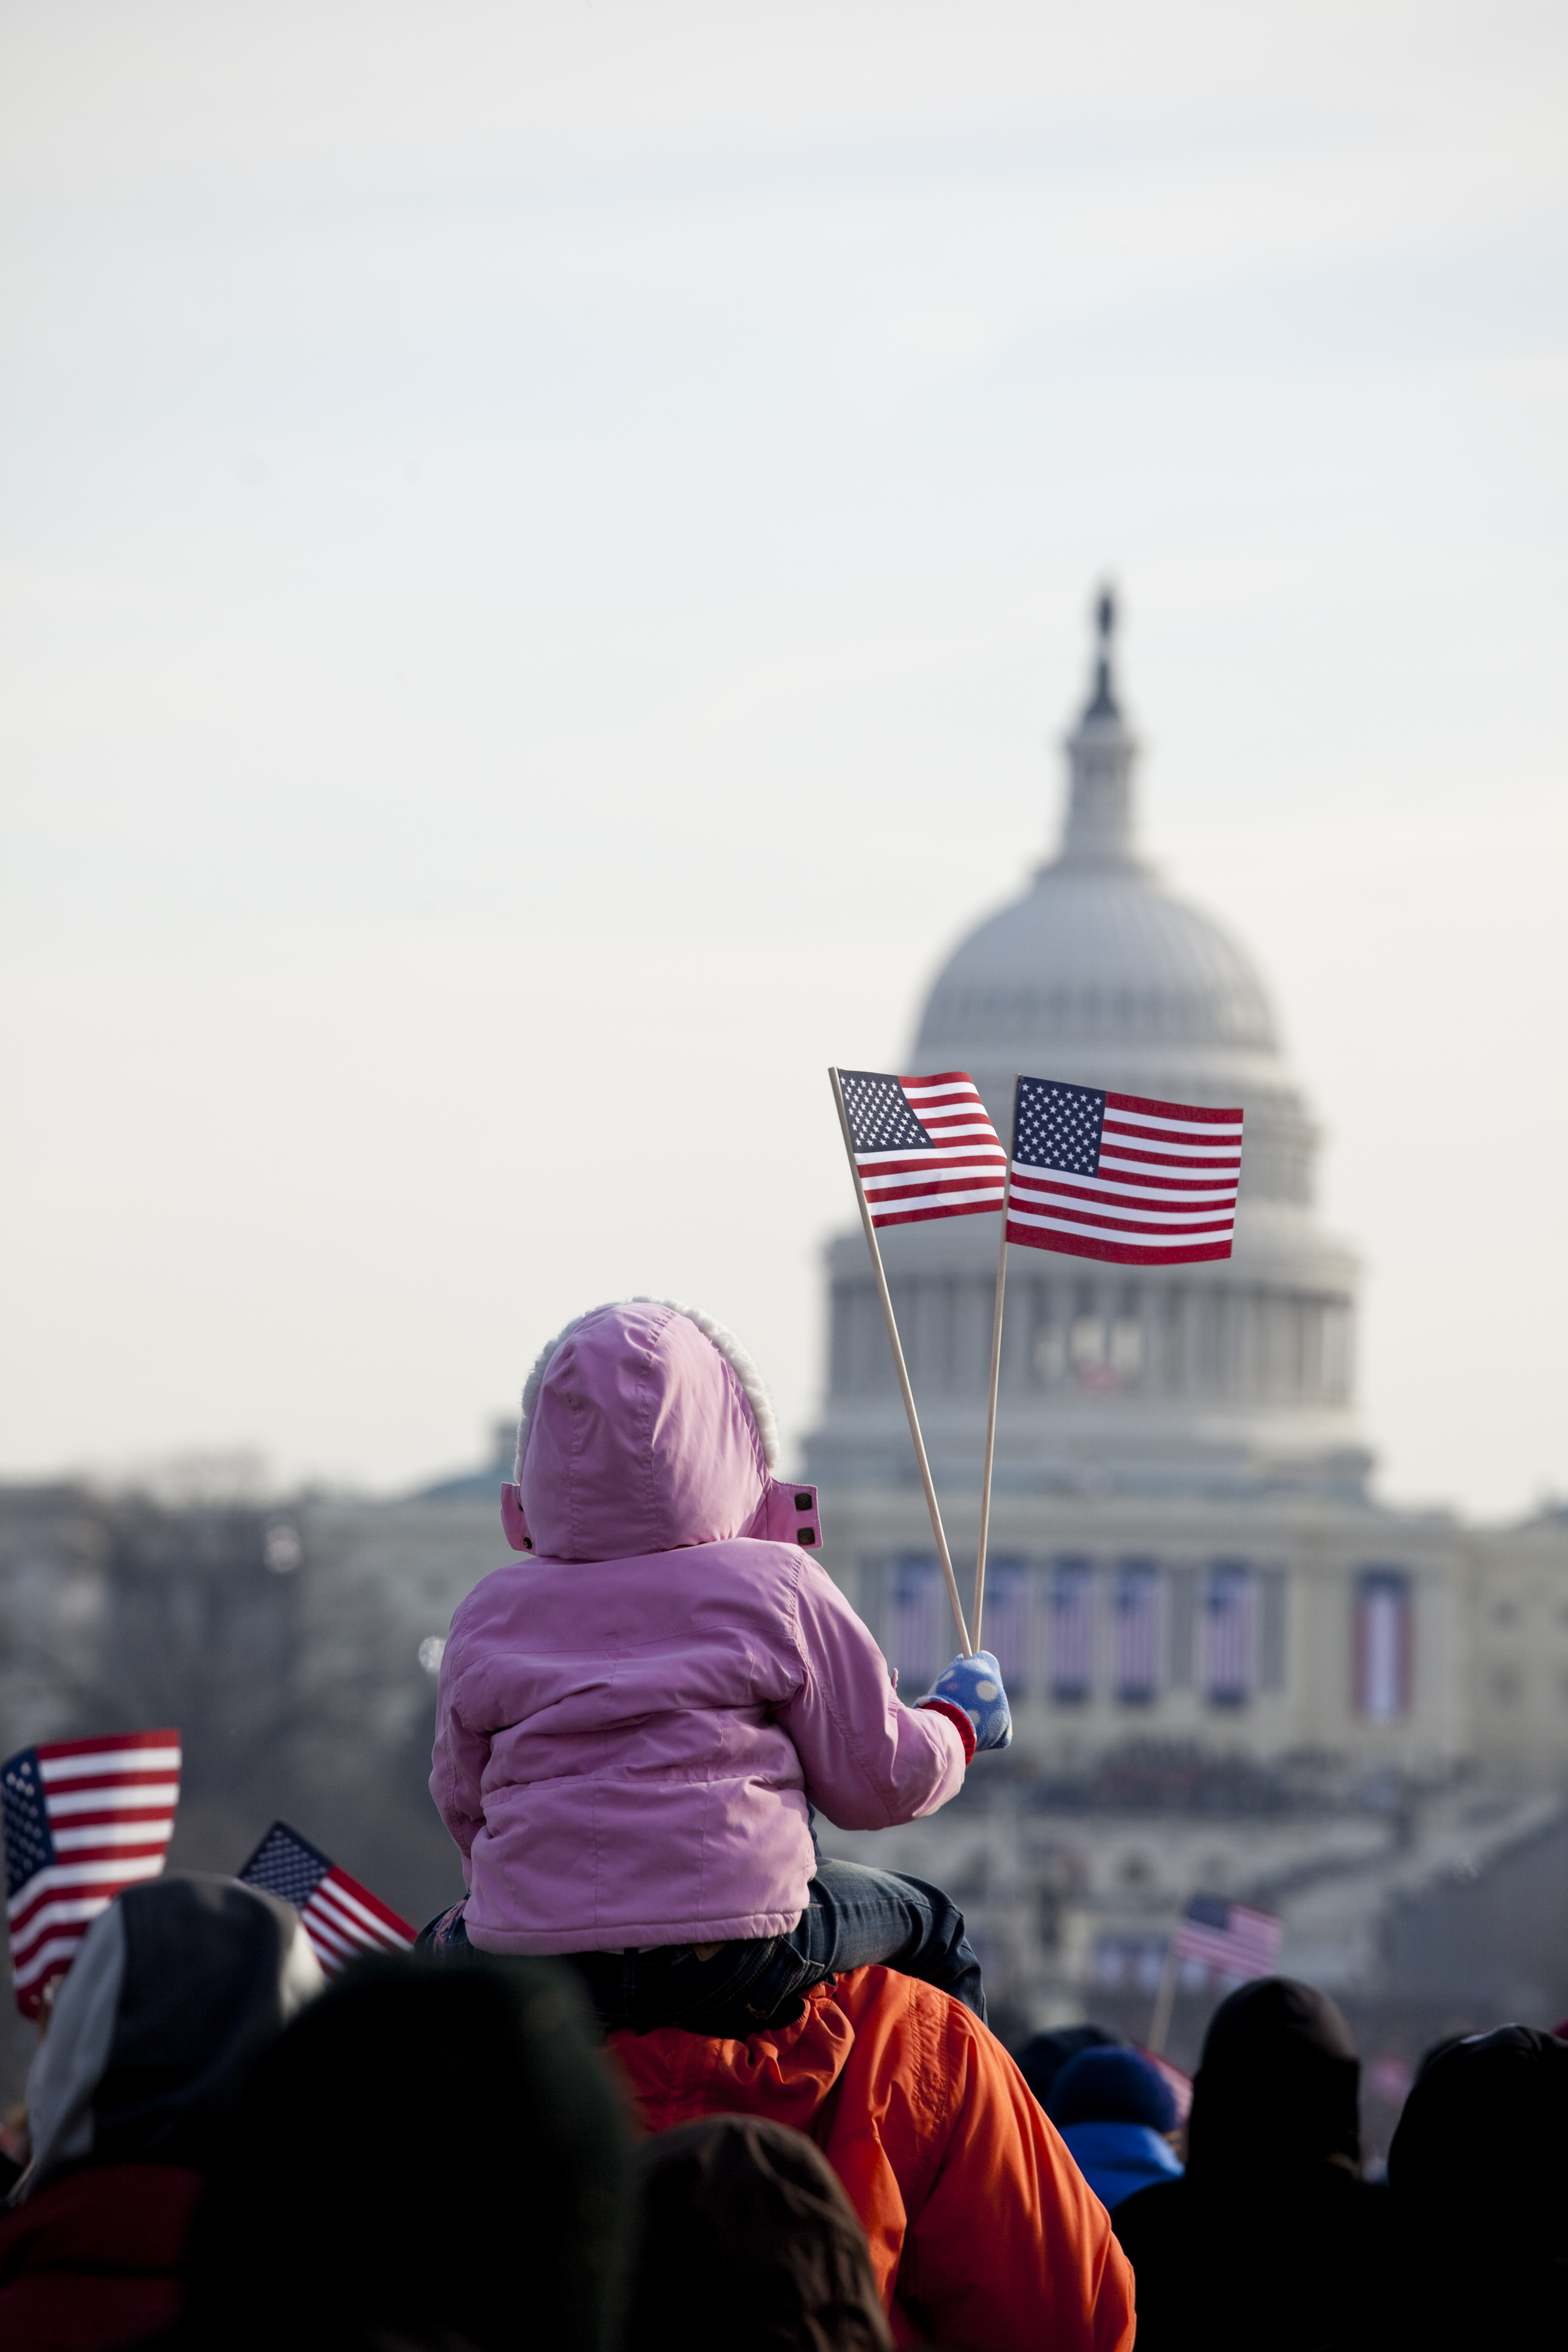 Image of a child on parent's shoulders waving a small US flag in a crowd of people in front of the U.S. capitol